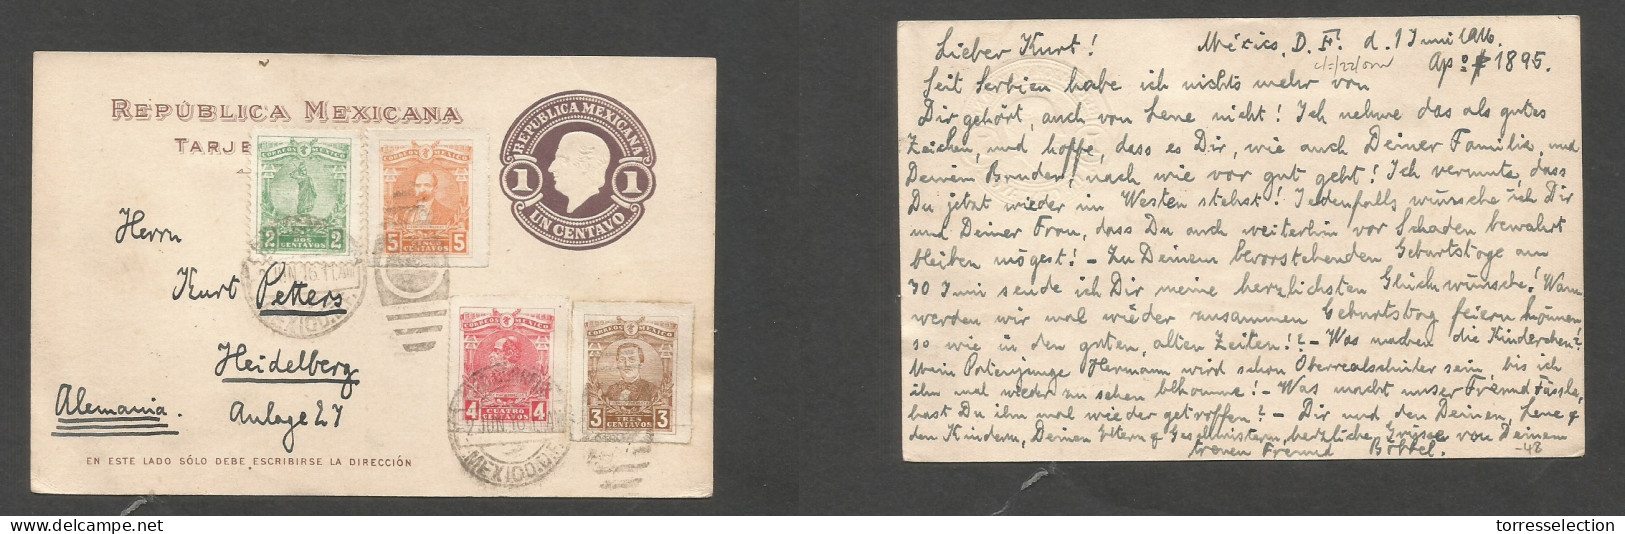 MEXICO - Stationery. 1916 (1-2 June) DF - Germany, Heidelberg 1c Lilac + 4 Diff Adtl, Stat Card, Cds Grill. Fine. Some S - Mexiko